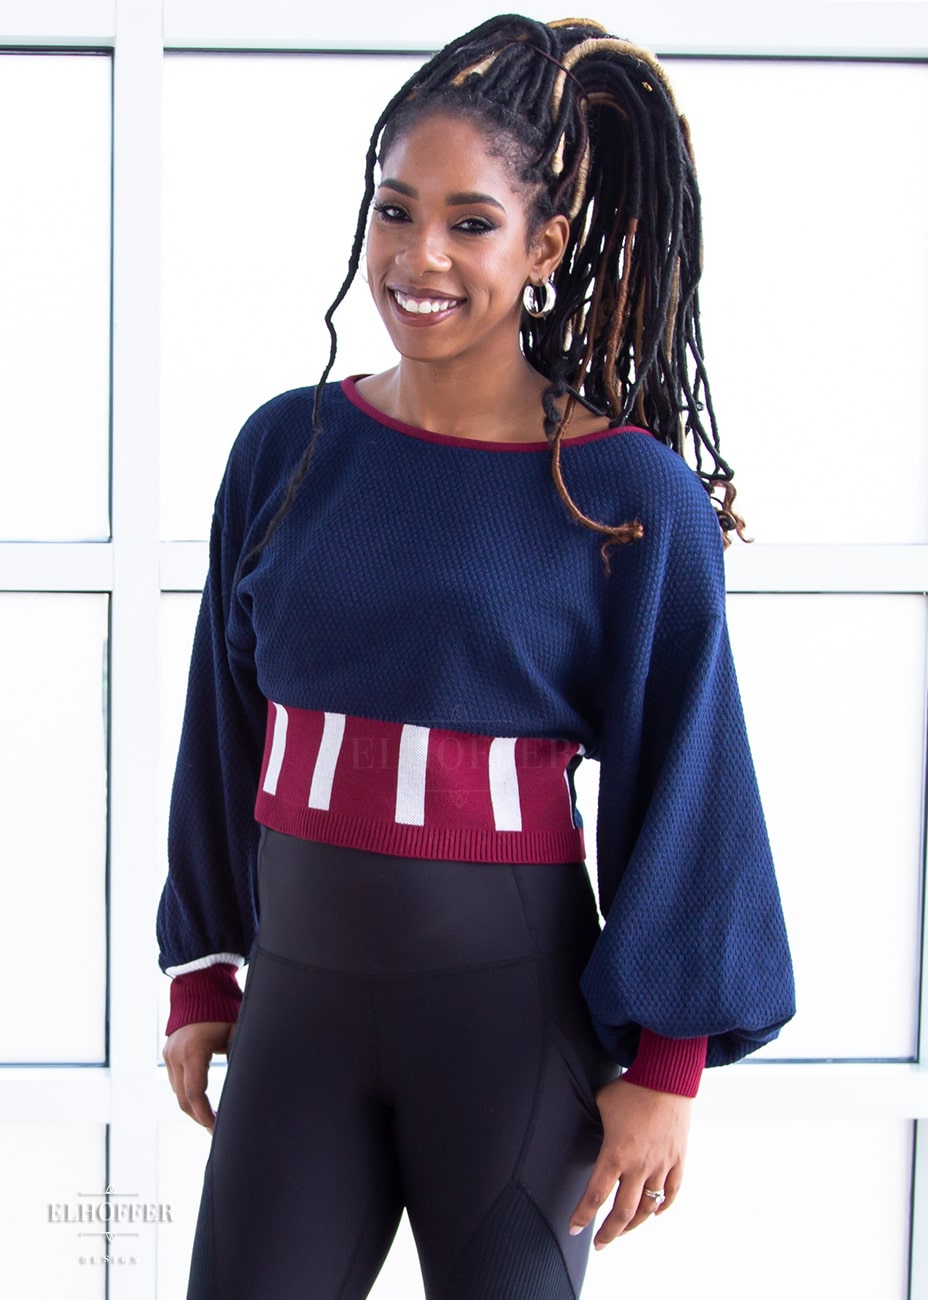 Krystina, a medium dark skinned S model with long braids in an updo, is smiling while wearing the red, white and blue knit oversized crop top with bishop sleeves. The sleeves and top of the crop are blue with a waffle knit, the waist is vertical red and white stripes. The cuffs are mainly red with a white detail. There is also a red detail at the neckline.